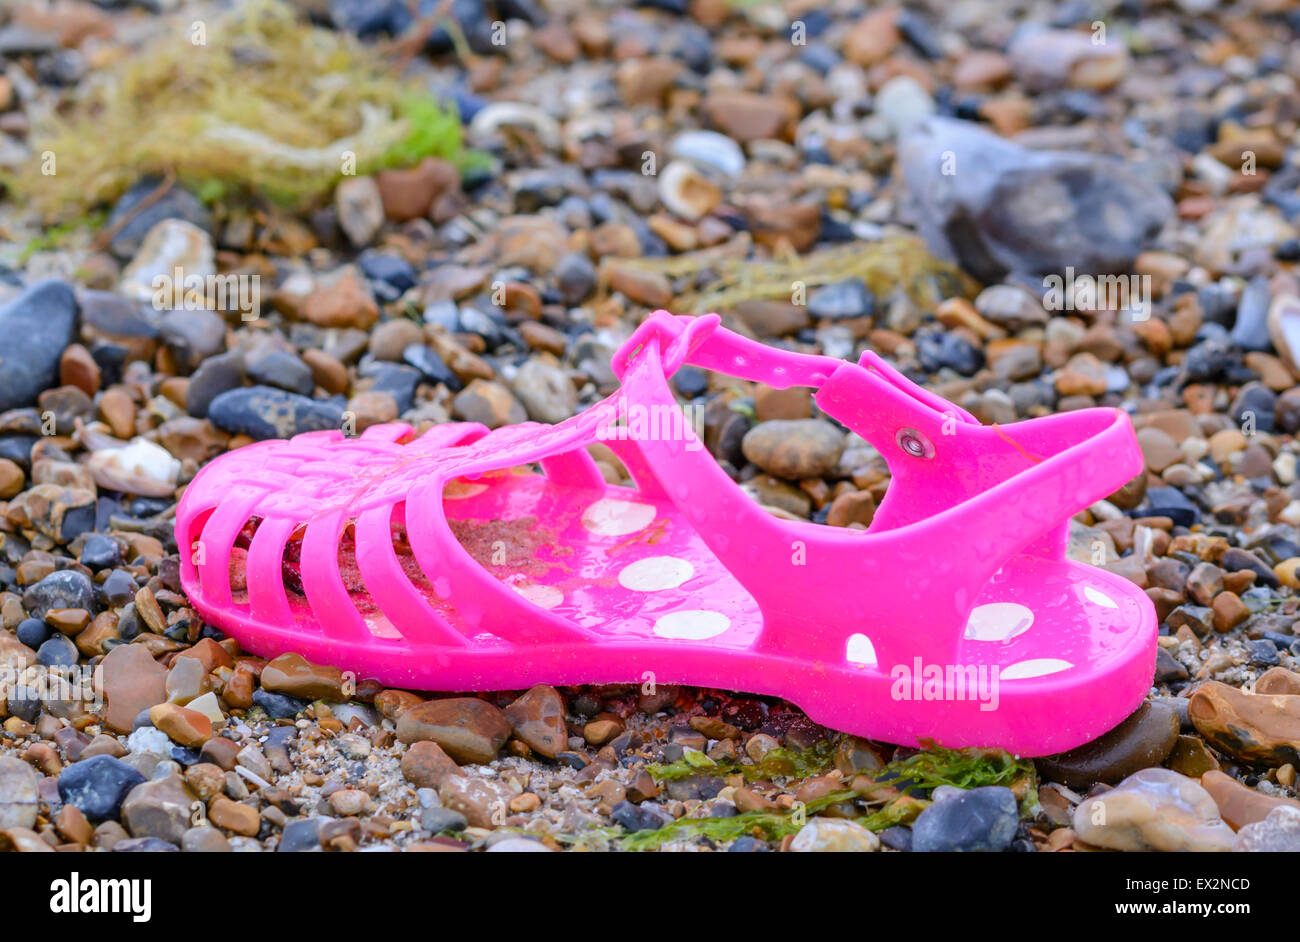 A pink sandal (croc) left on a beach and covered in water. Stock Photo